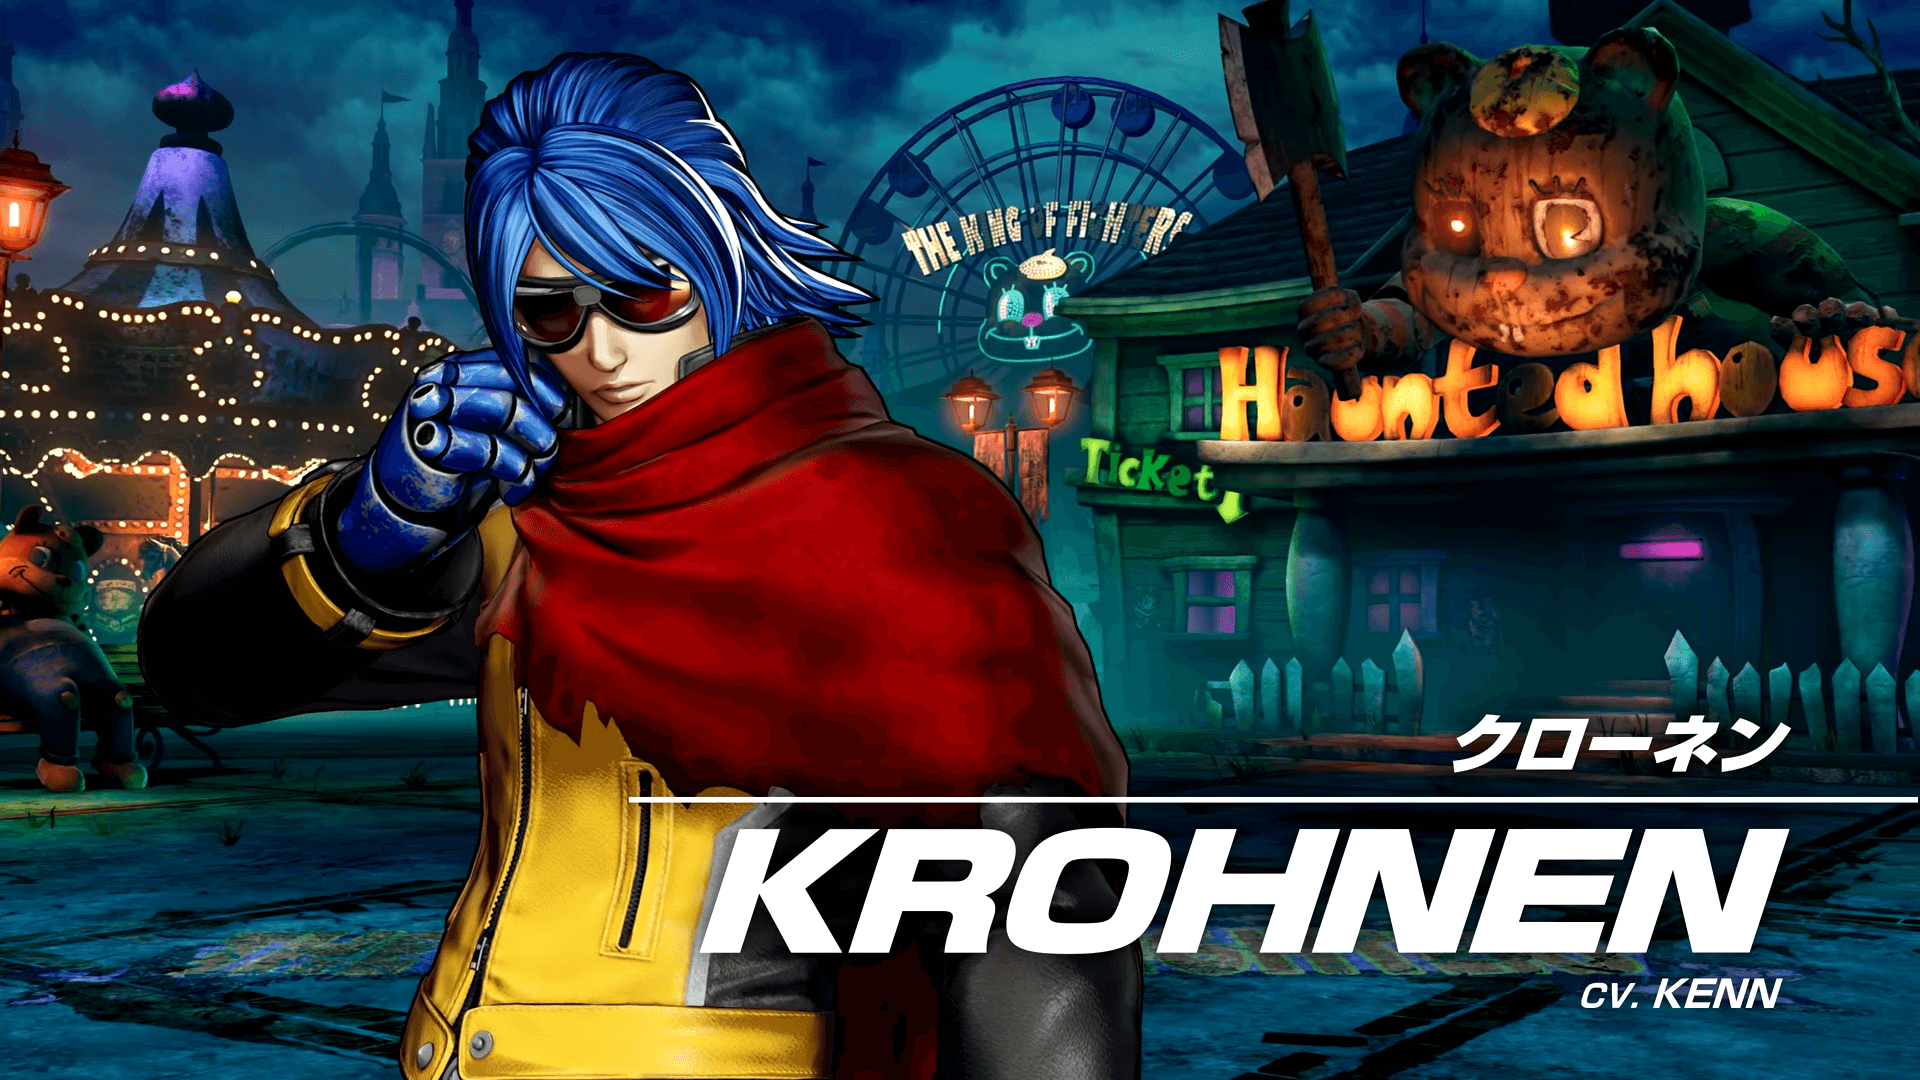 Krohnen — A New Character Joins The King of Fighters XV